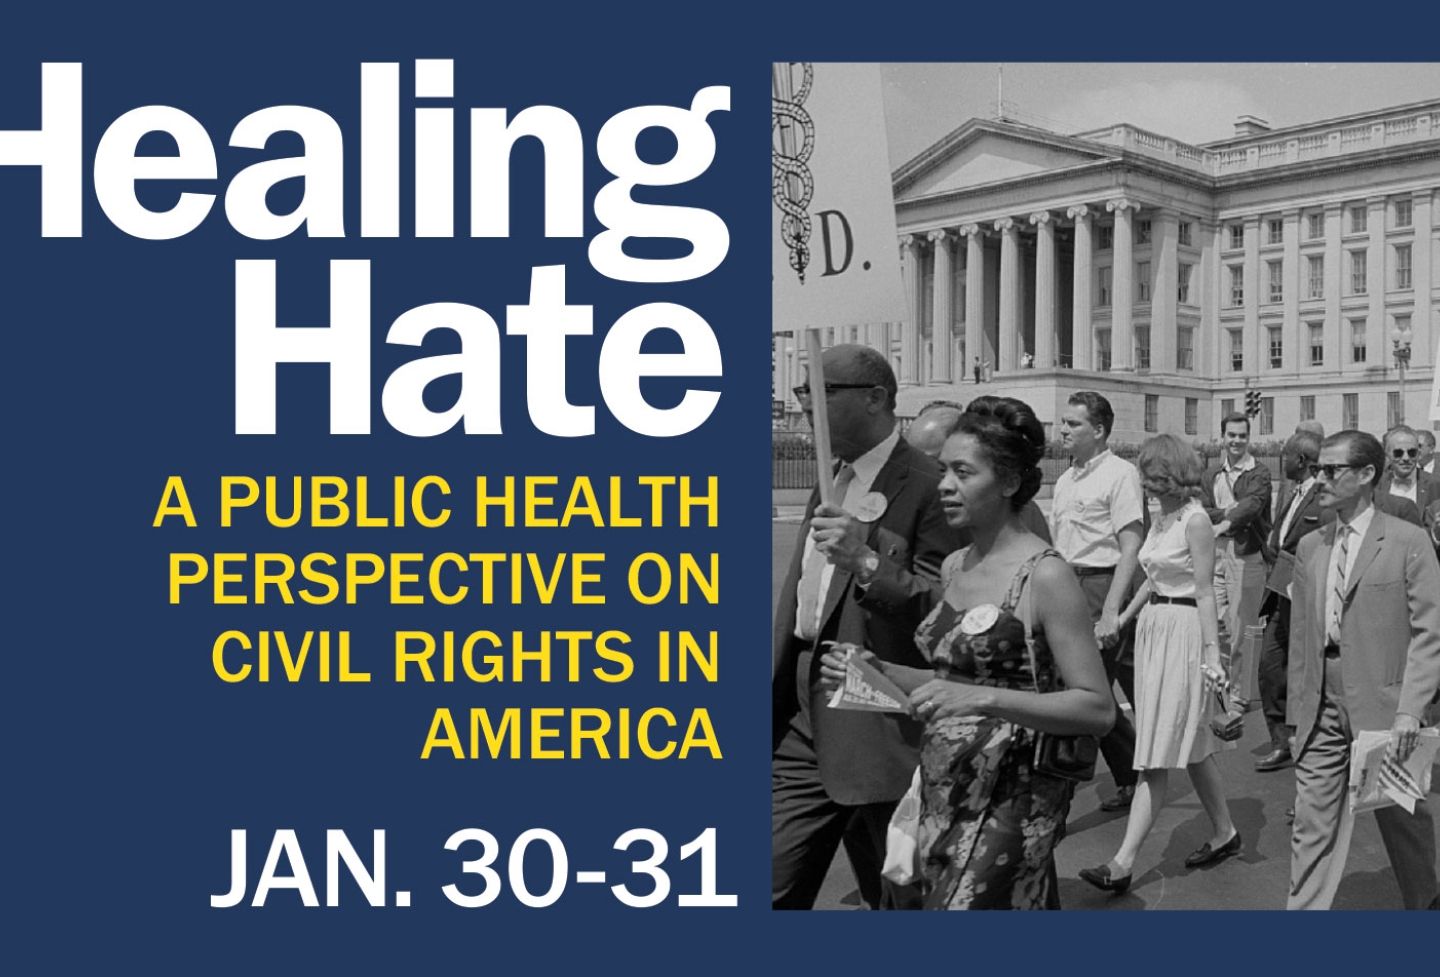 Healing Hate: A Public Health Perspective on Civil Rights in America, Jan. 30-31